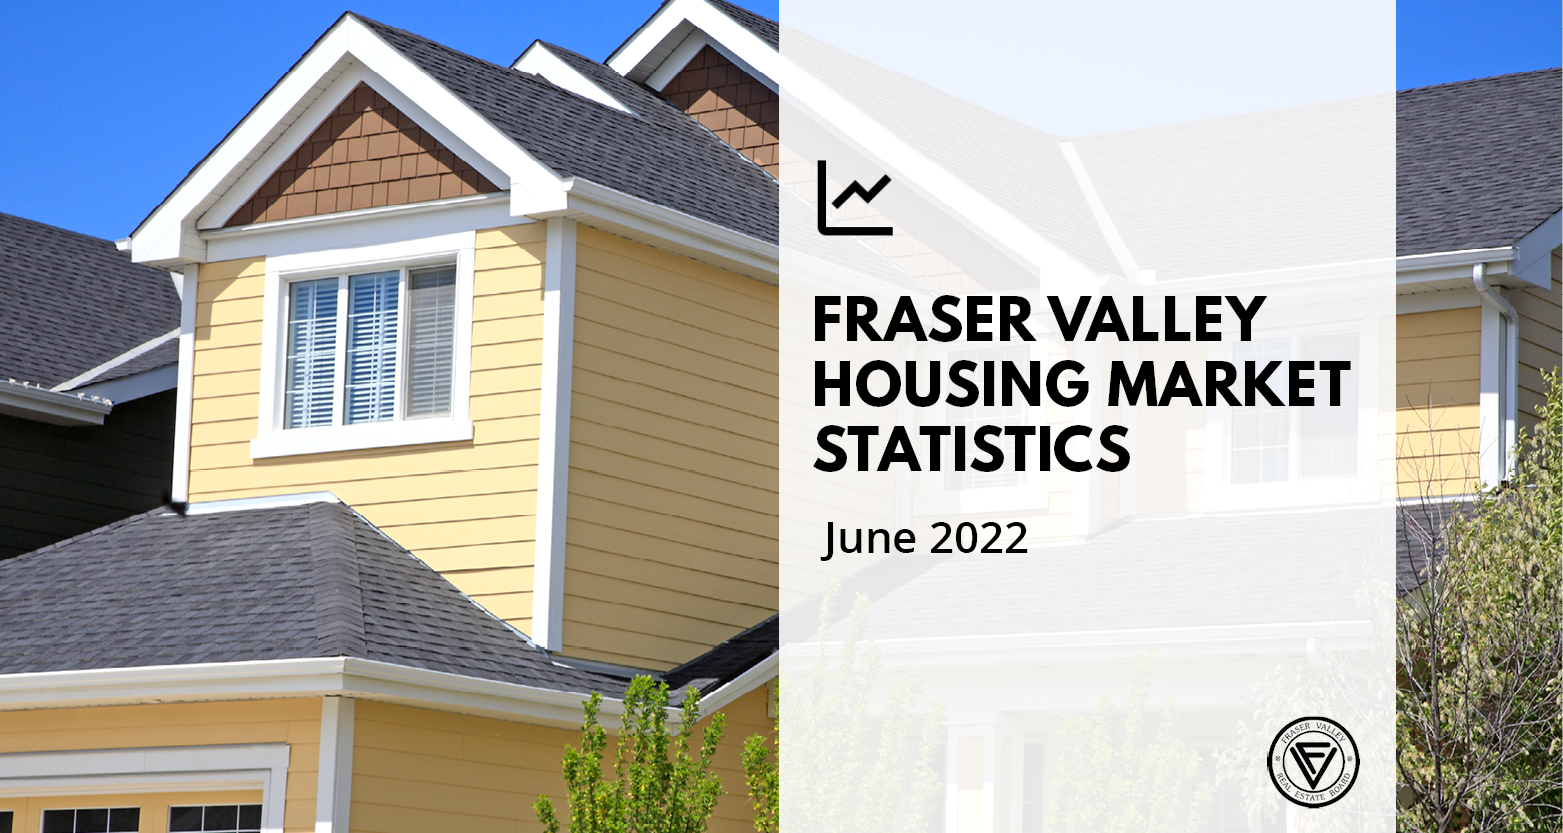 Fraser Valley housing market continues to cool amid slower sales, softer prices